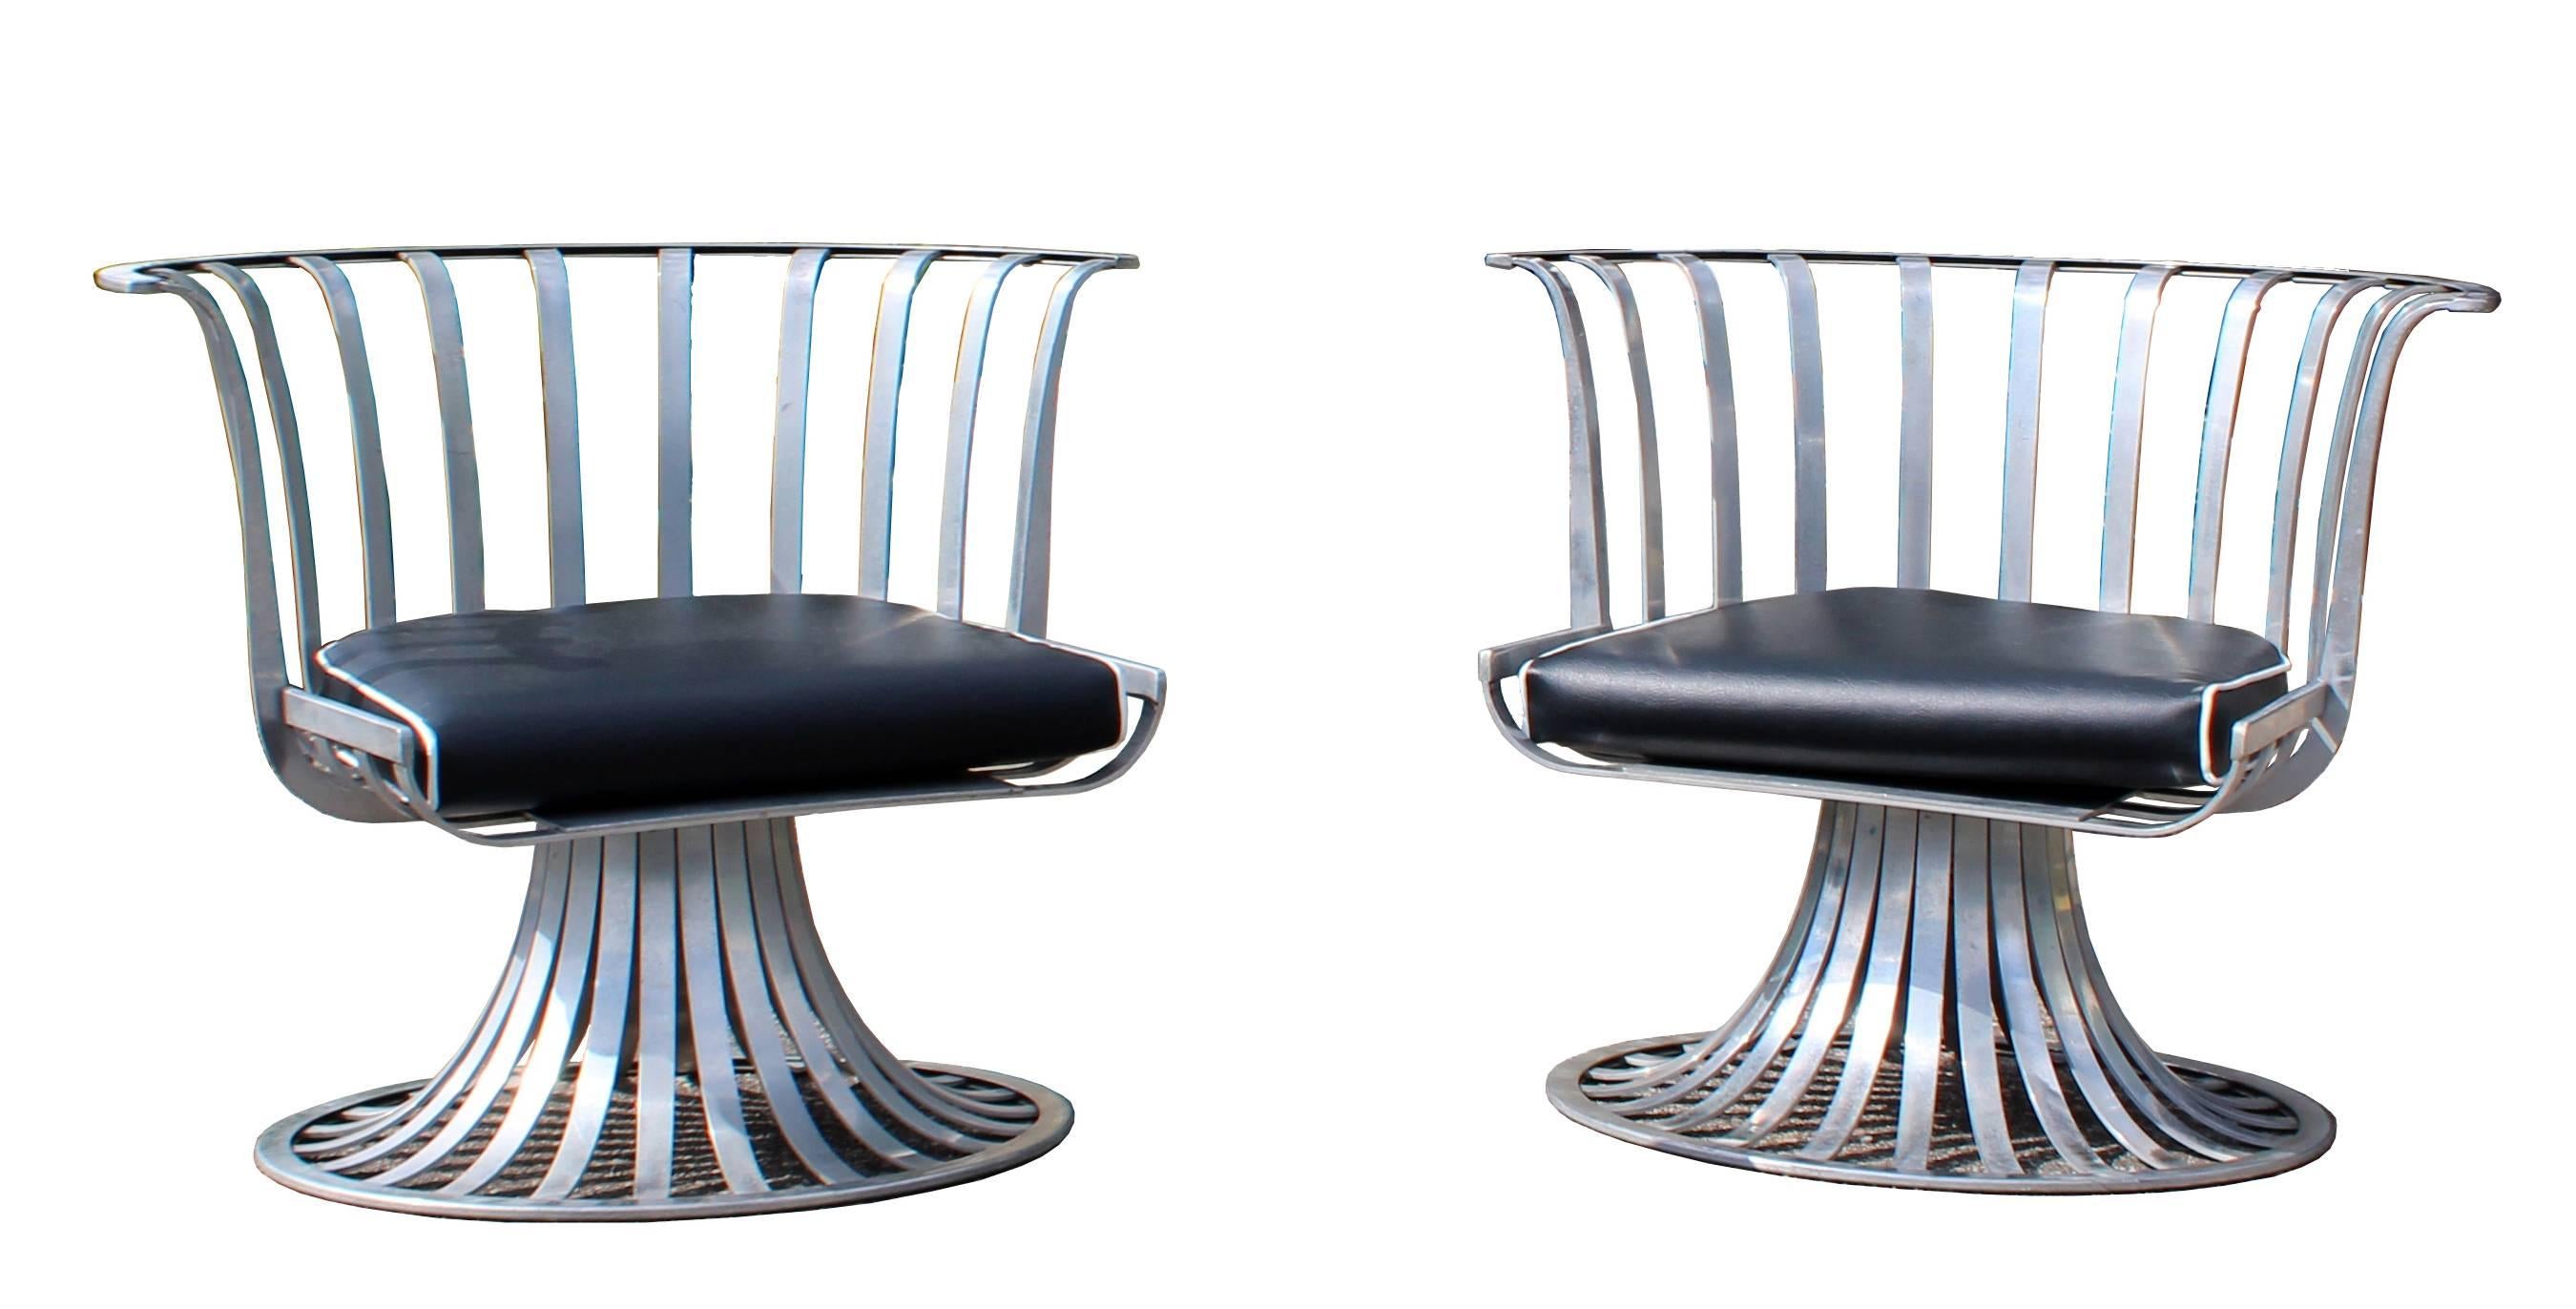 For your consideration is a rare and exciting, aluminum spoke patio set, including two chairs and a chaise longue, just back from being professionally reupholstered in black Naugahyde with white piping. Designed by Russell Woodard, circa the 1960s.